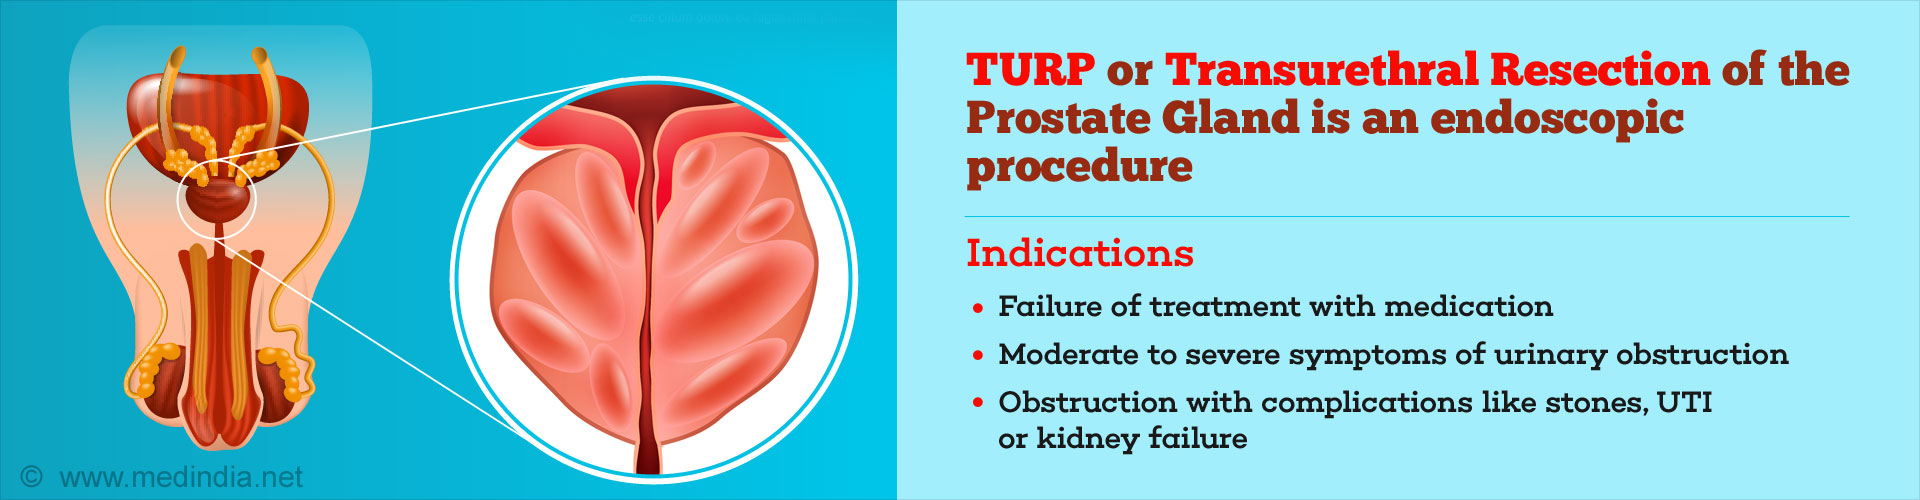 Transurethral Resection Of Prostate Turp For Prostate Enlargement 4479